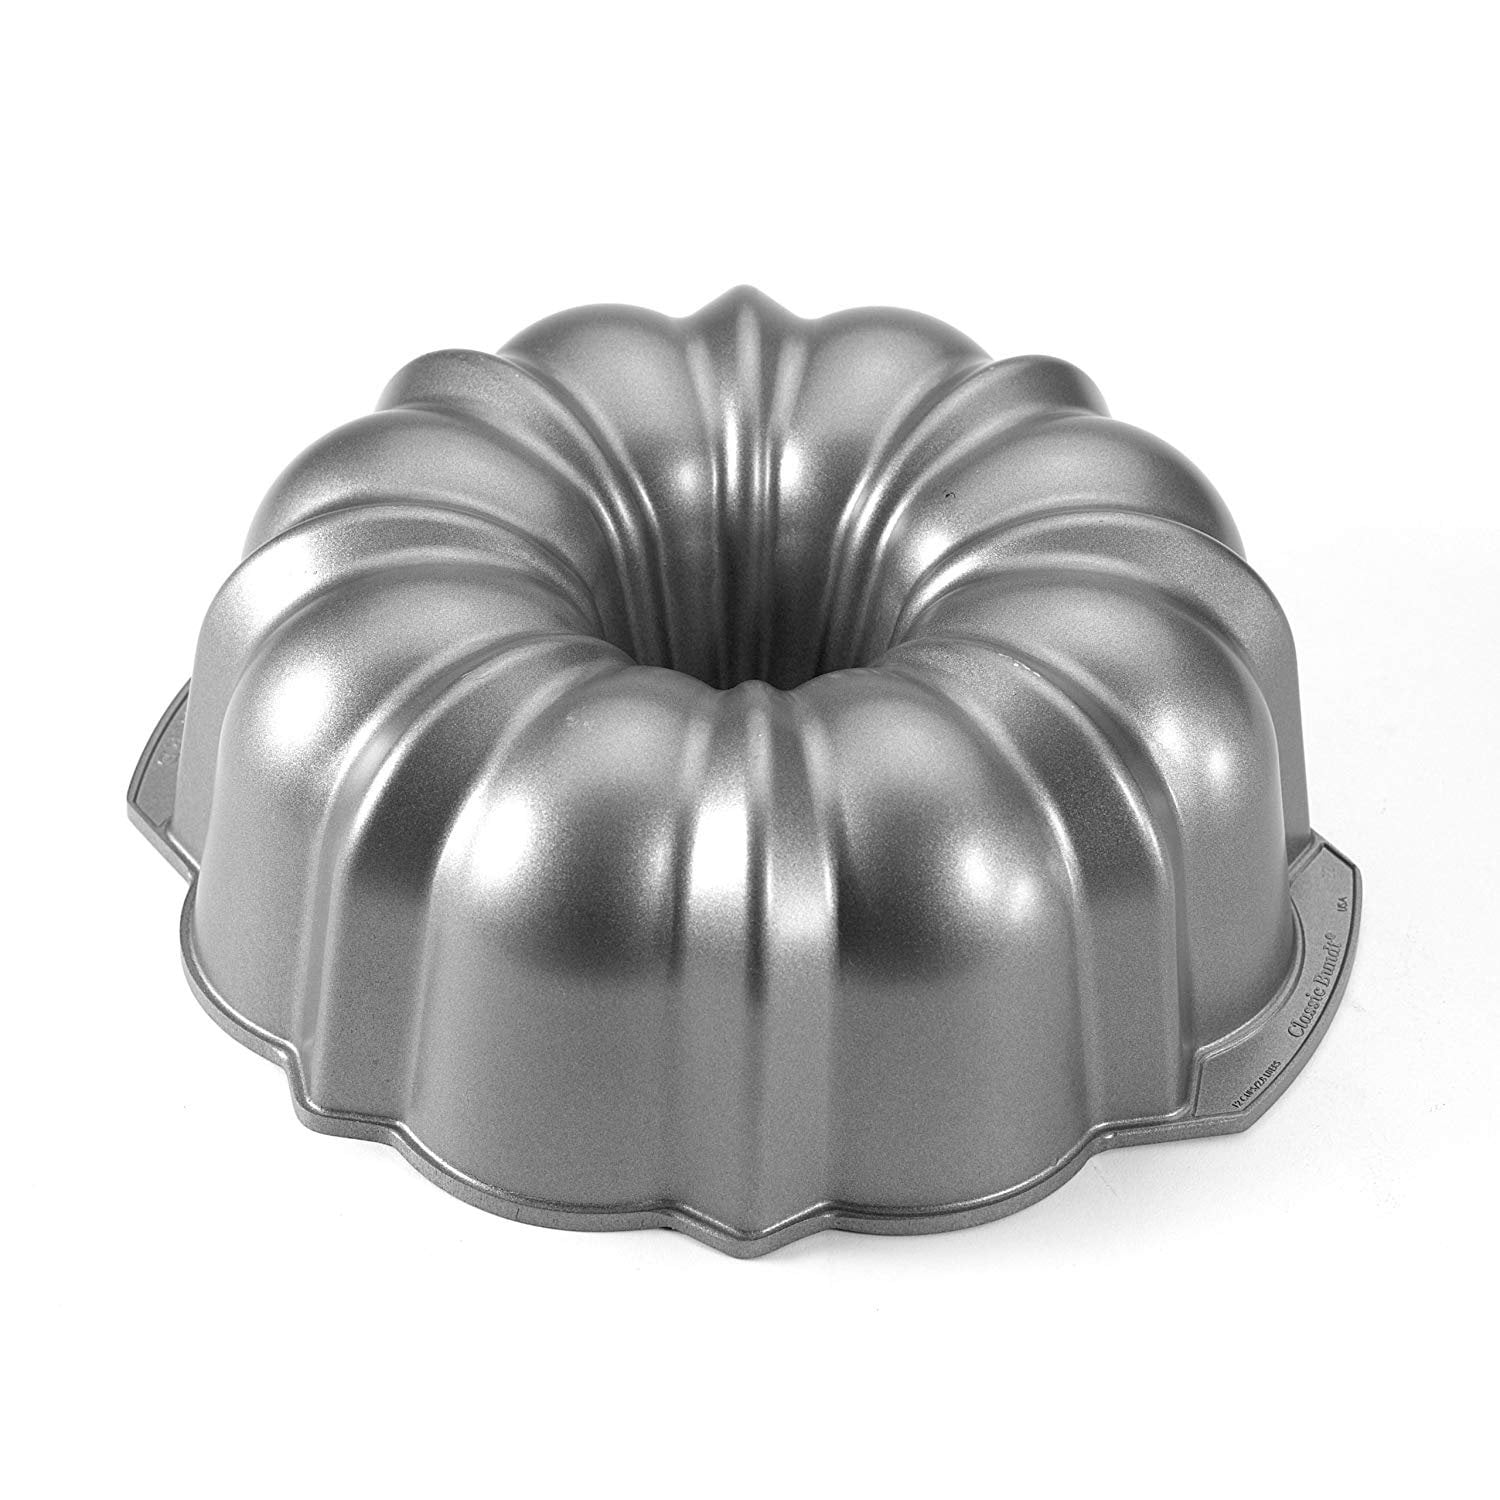 Vintage 12 Cup Bundt Pan By Nordic Ware Microwave And Oven Safe New Old  Stock